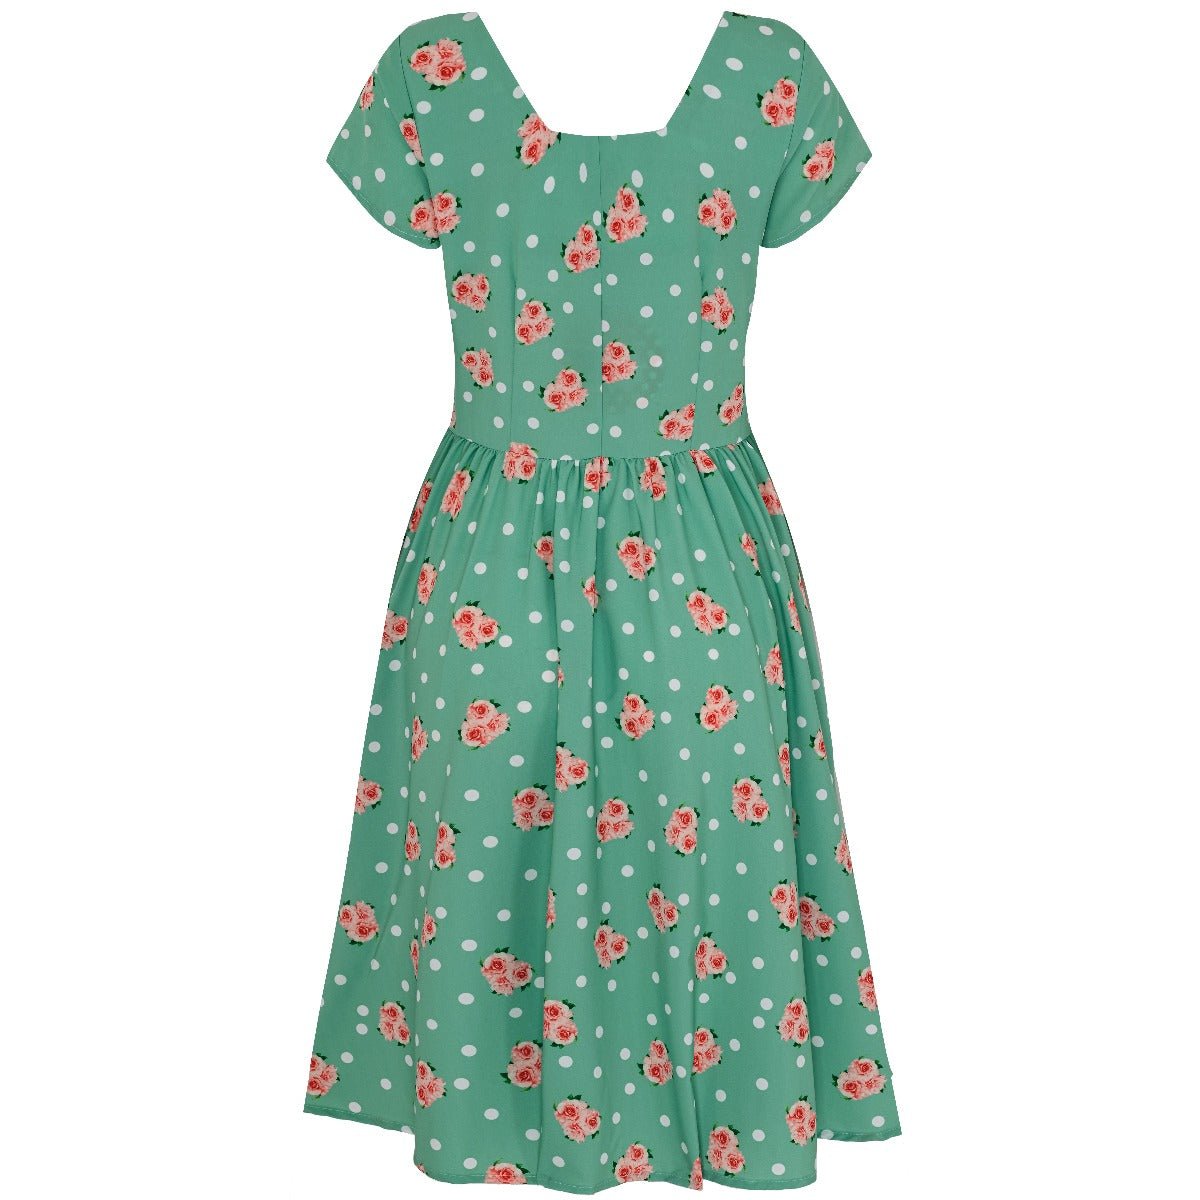 Viktoria 50s A-line Dress in Green/Pink Roses/White Dots